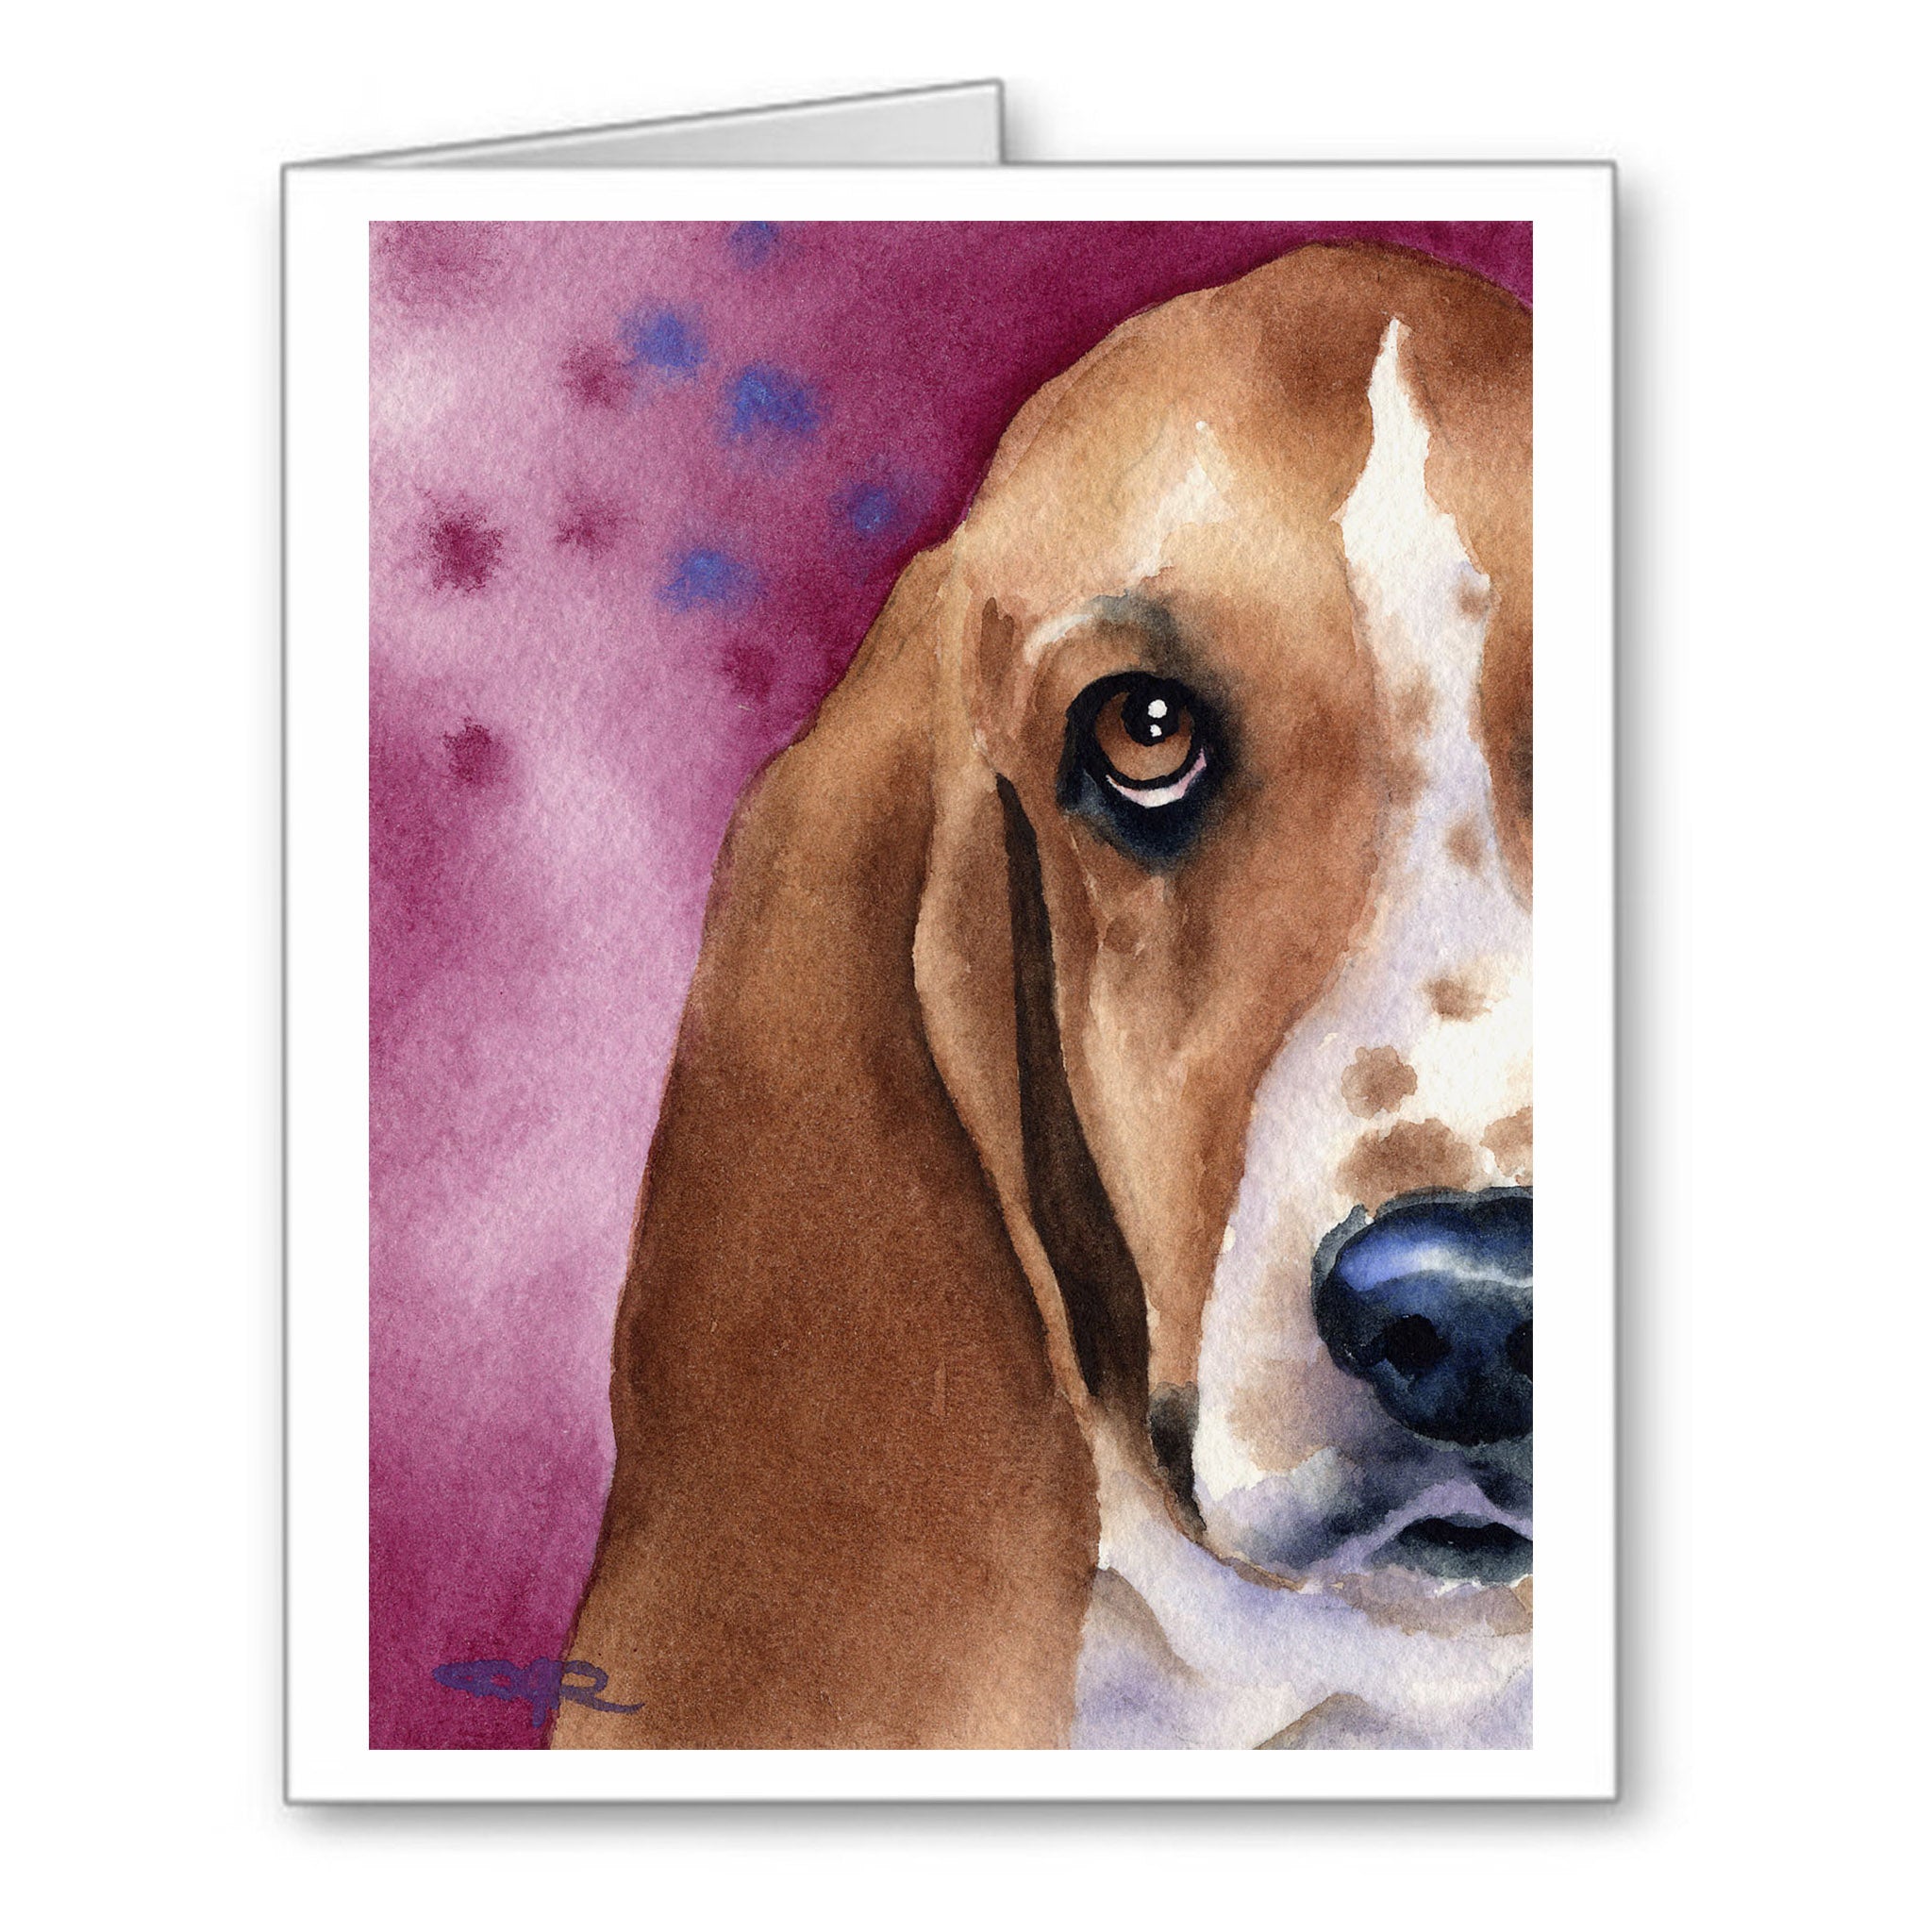 Basset Hound Watercolor Note Card Art by Artist DJ Rogers